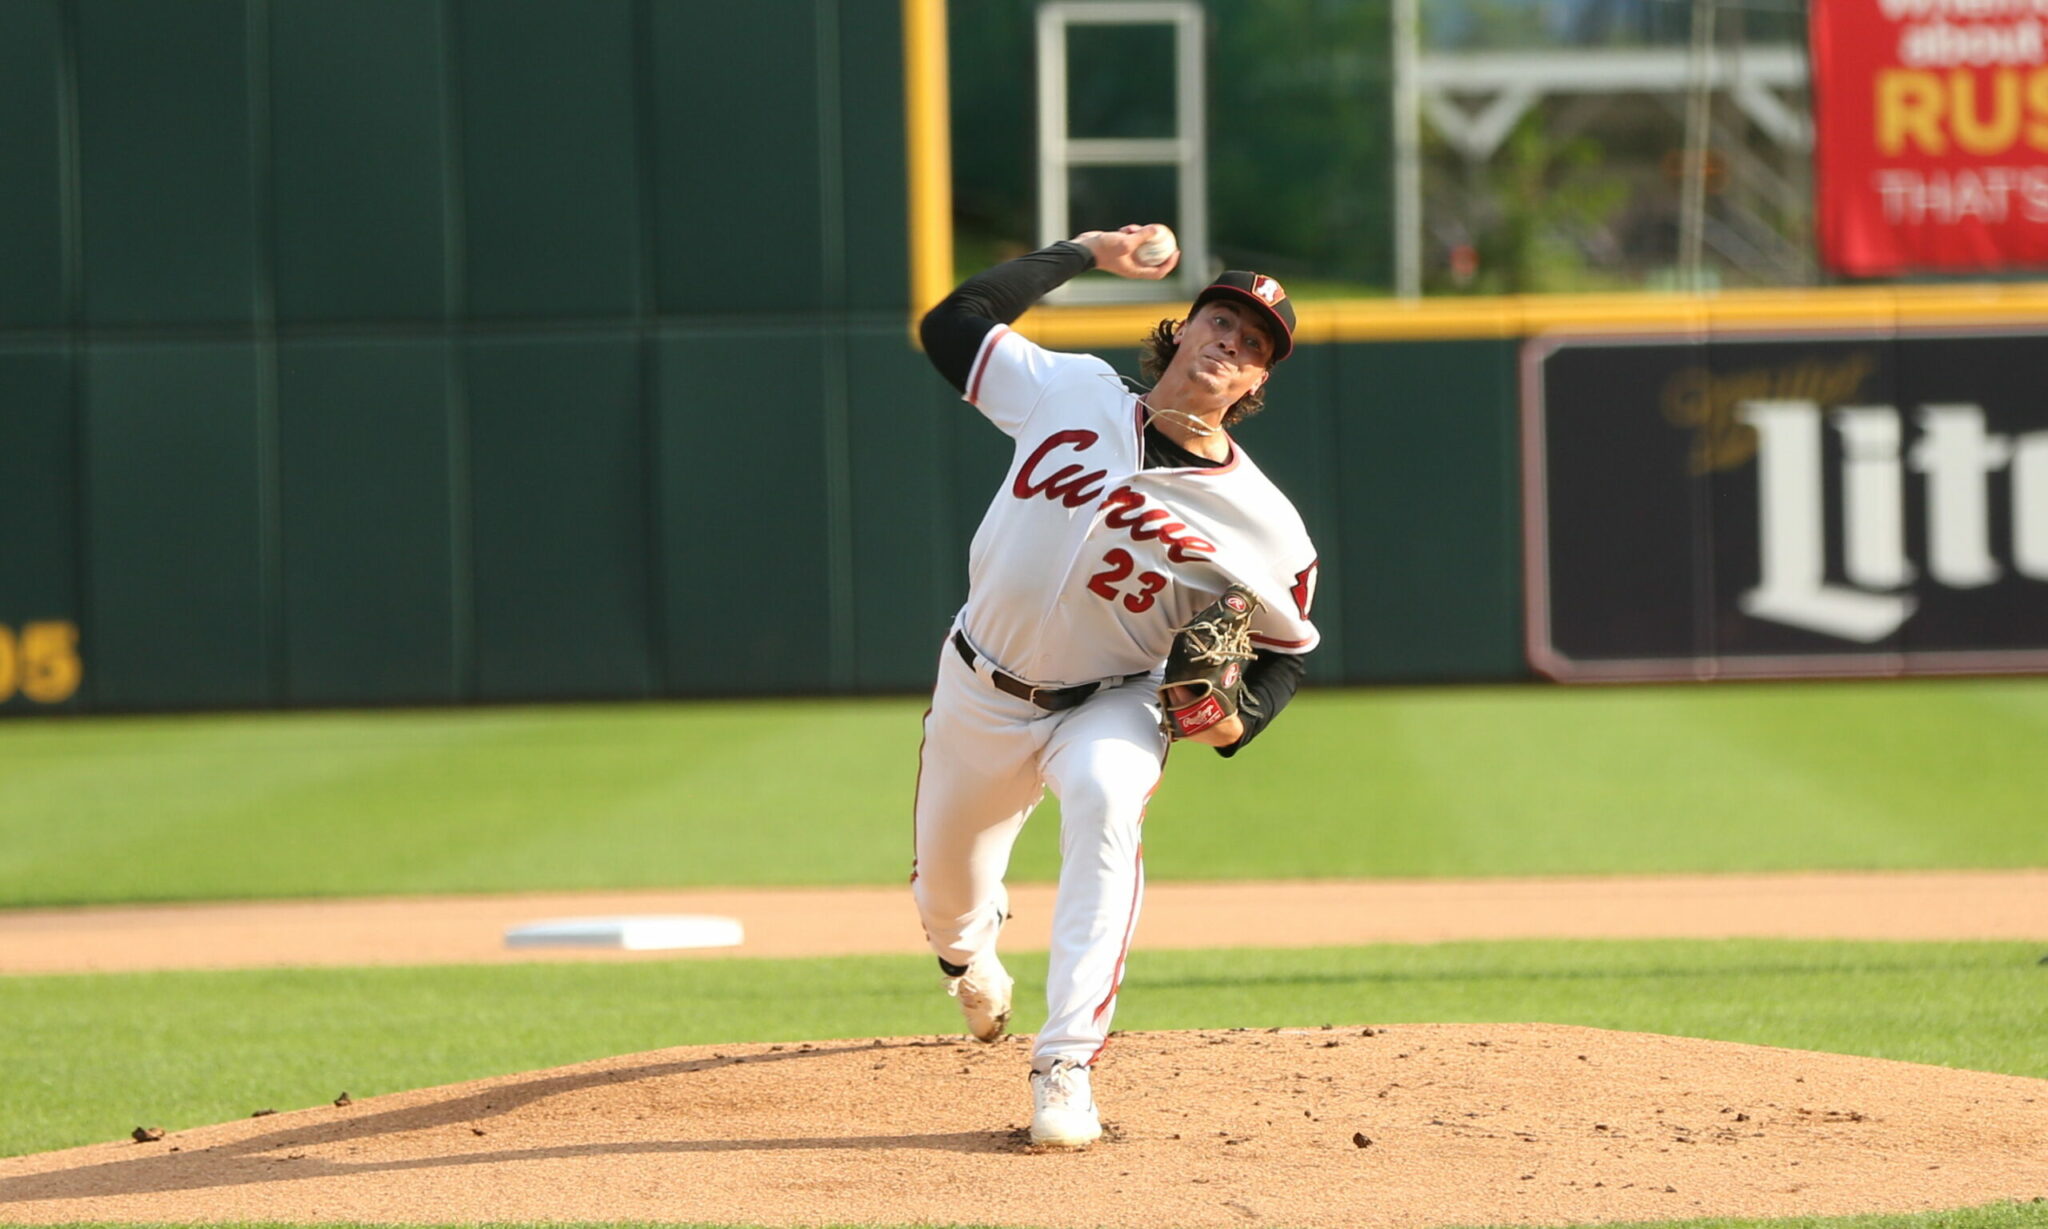 Altoona Curve: Developing Control Takes Patience And Sometimes, Failure